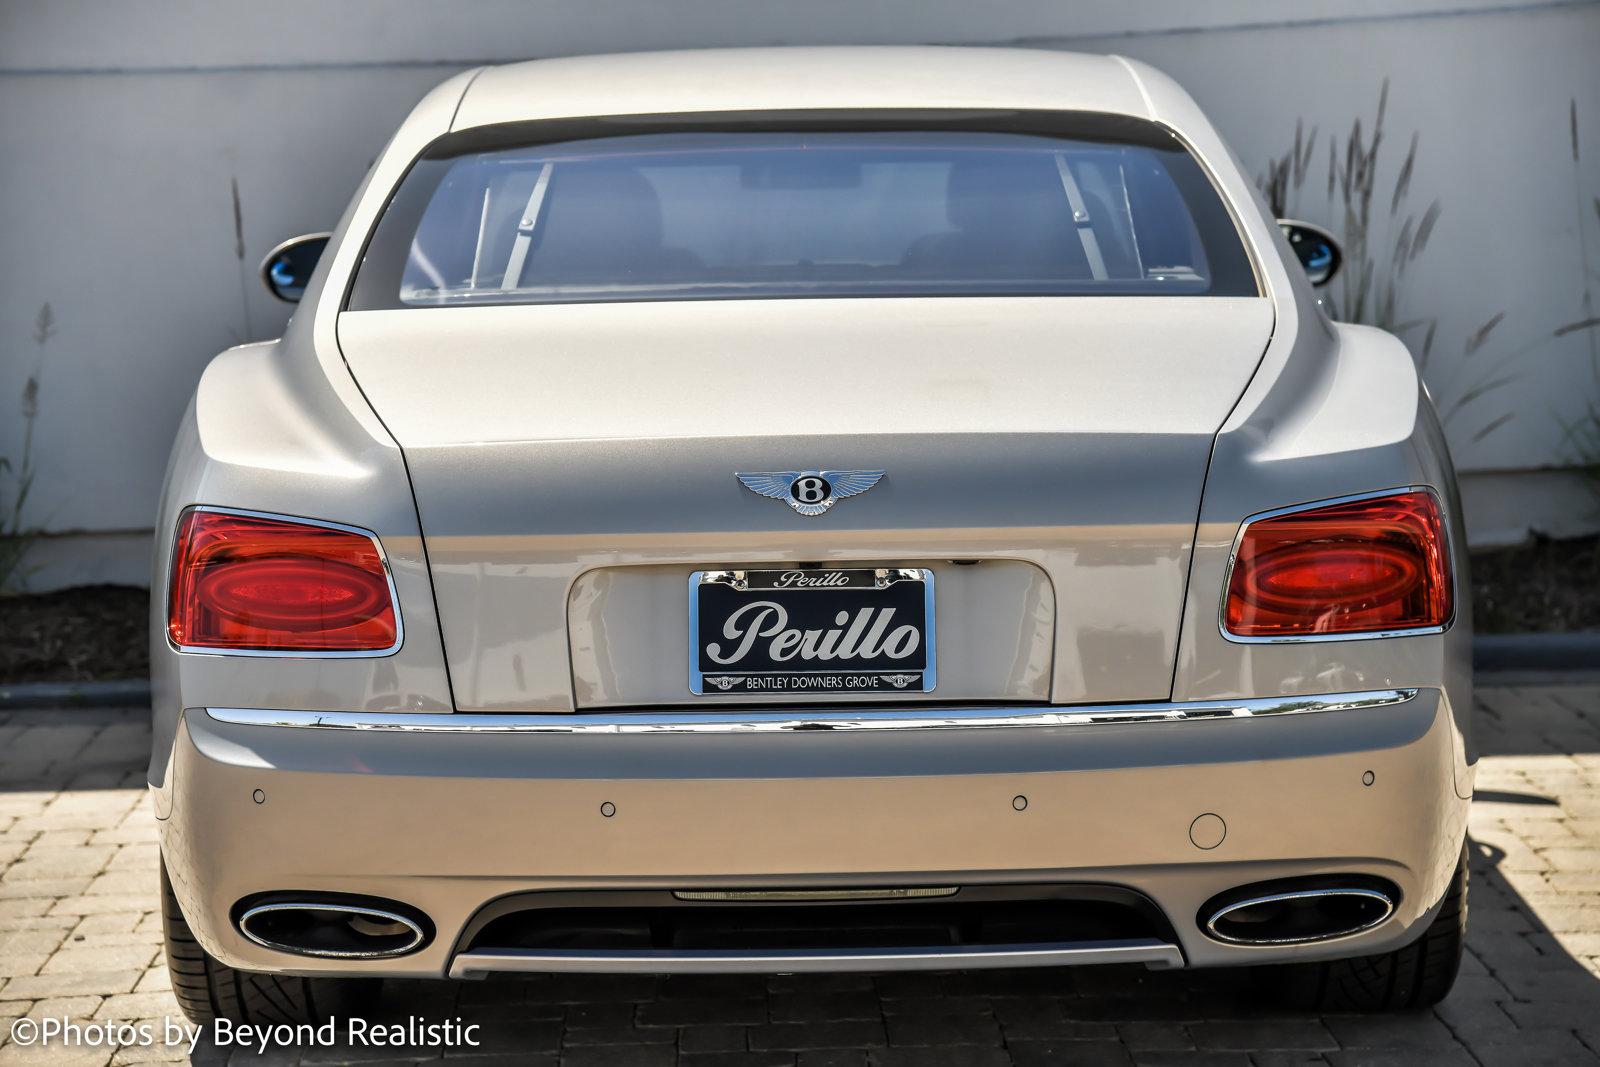 Used 2018 Bentley Flying Spur W12 | Downers Grove, IL